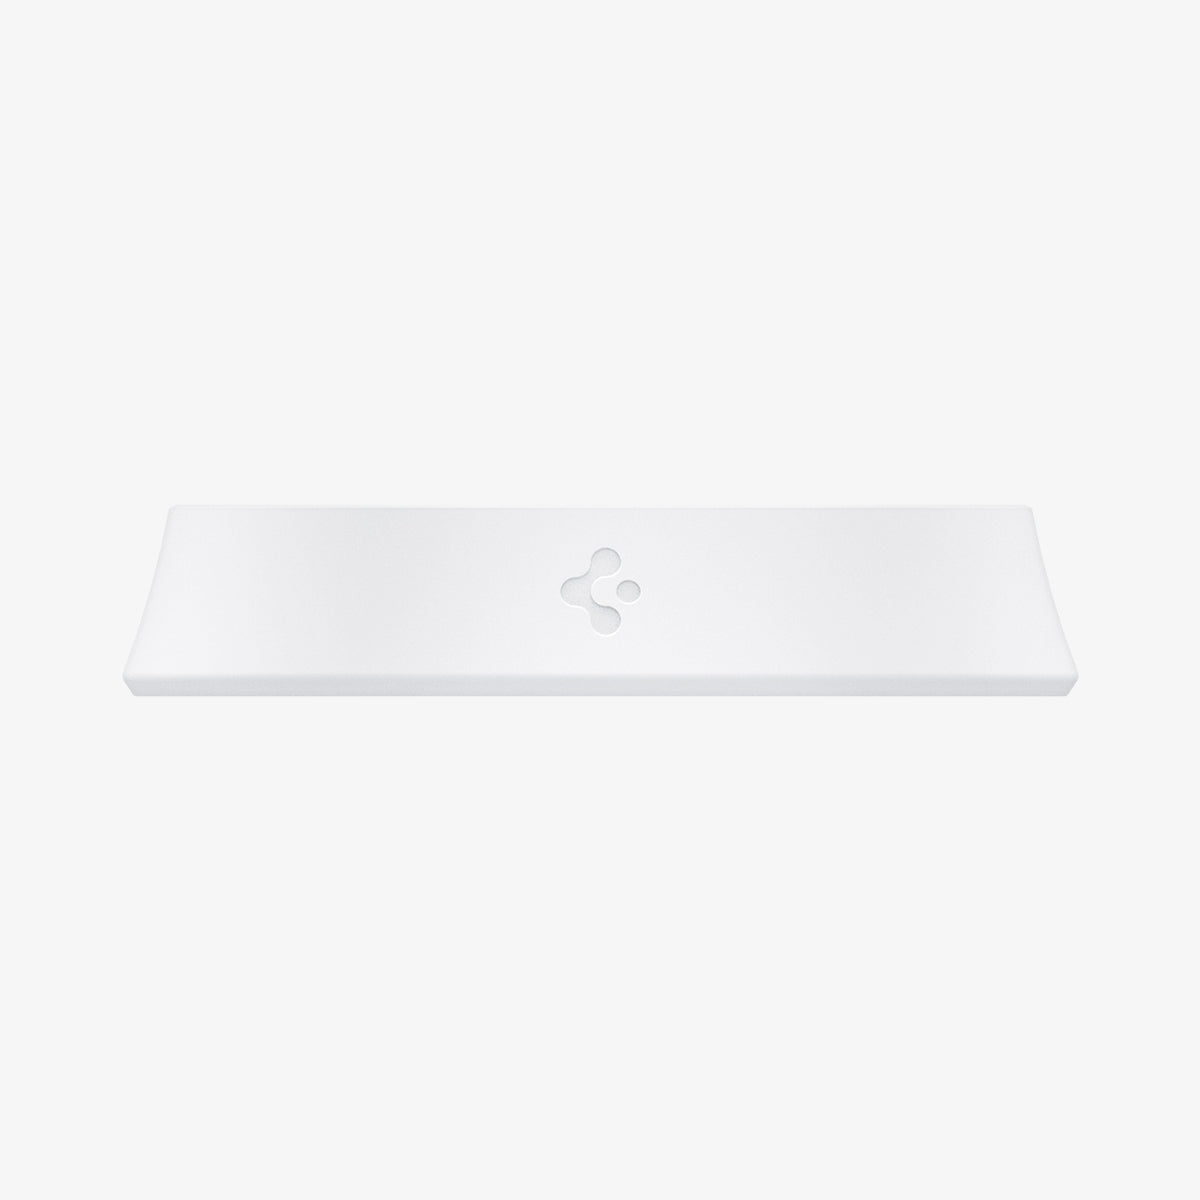 AMP02816 - Apple HomePod Mini Stand Silicone Fit in white showing the front